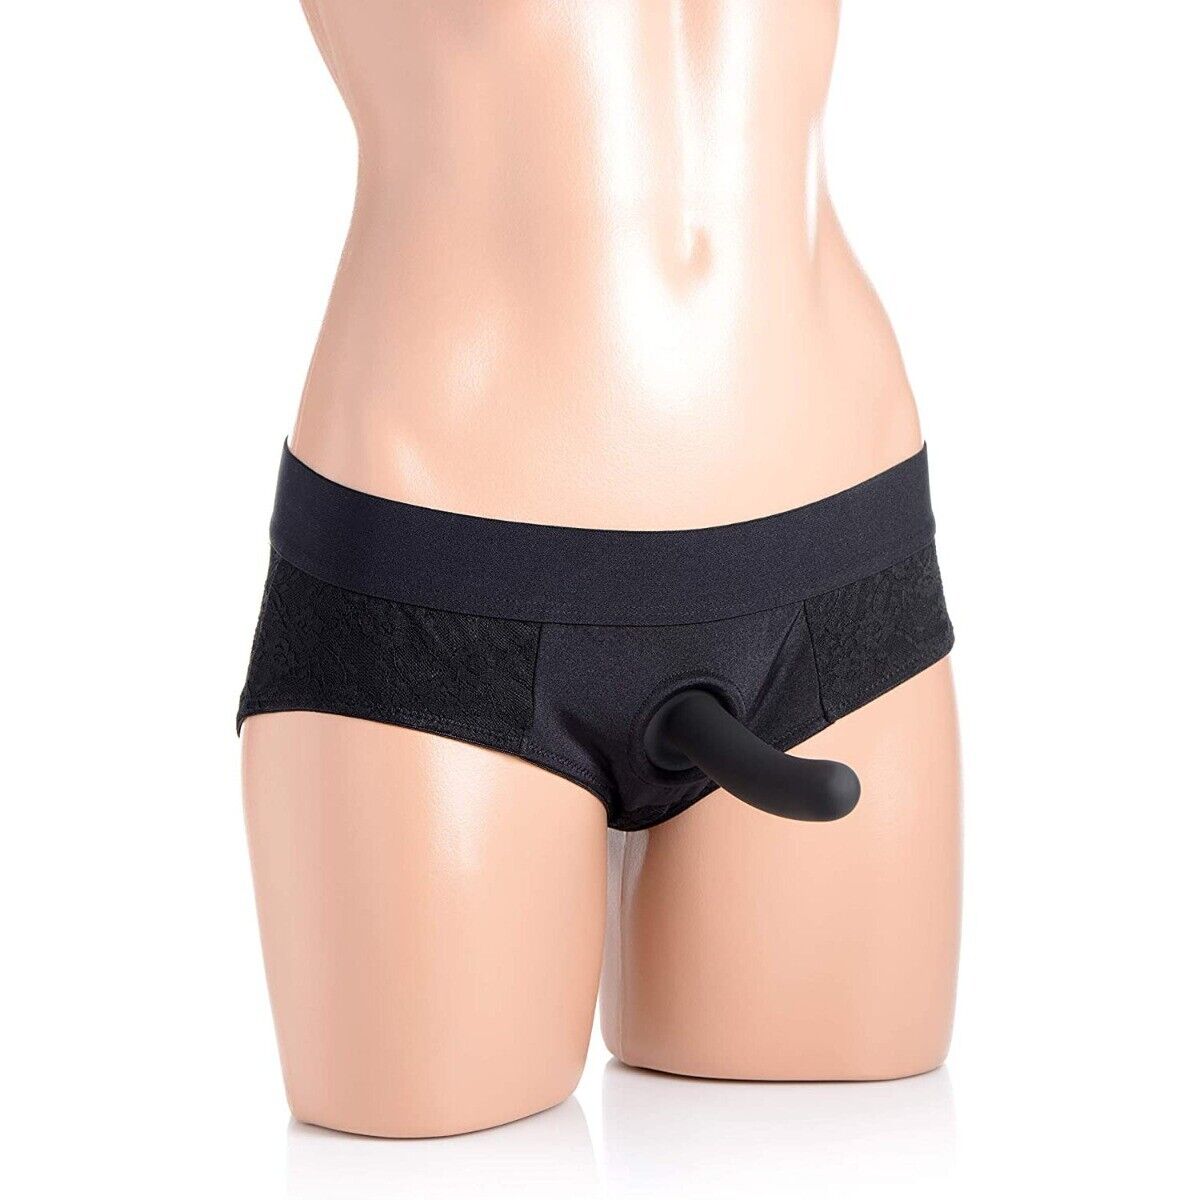 Lace Envy Black Crotchless Panty Strap On Harness L-XL Sex-toys for Women Couple